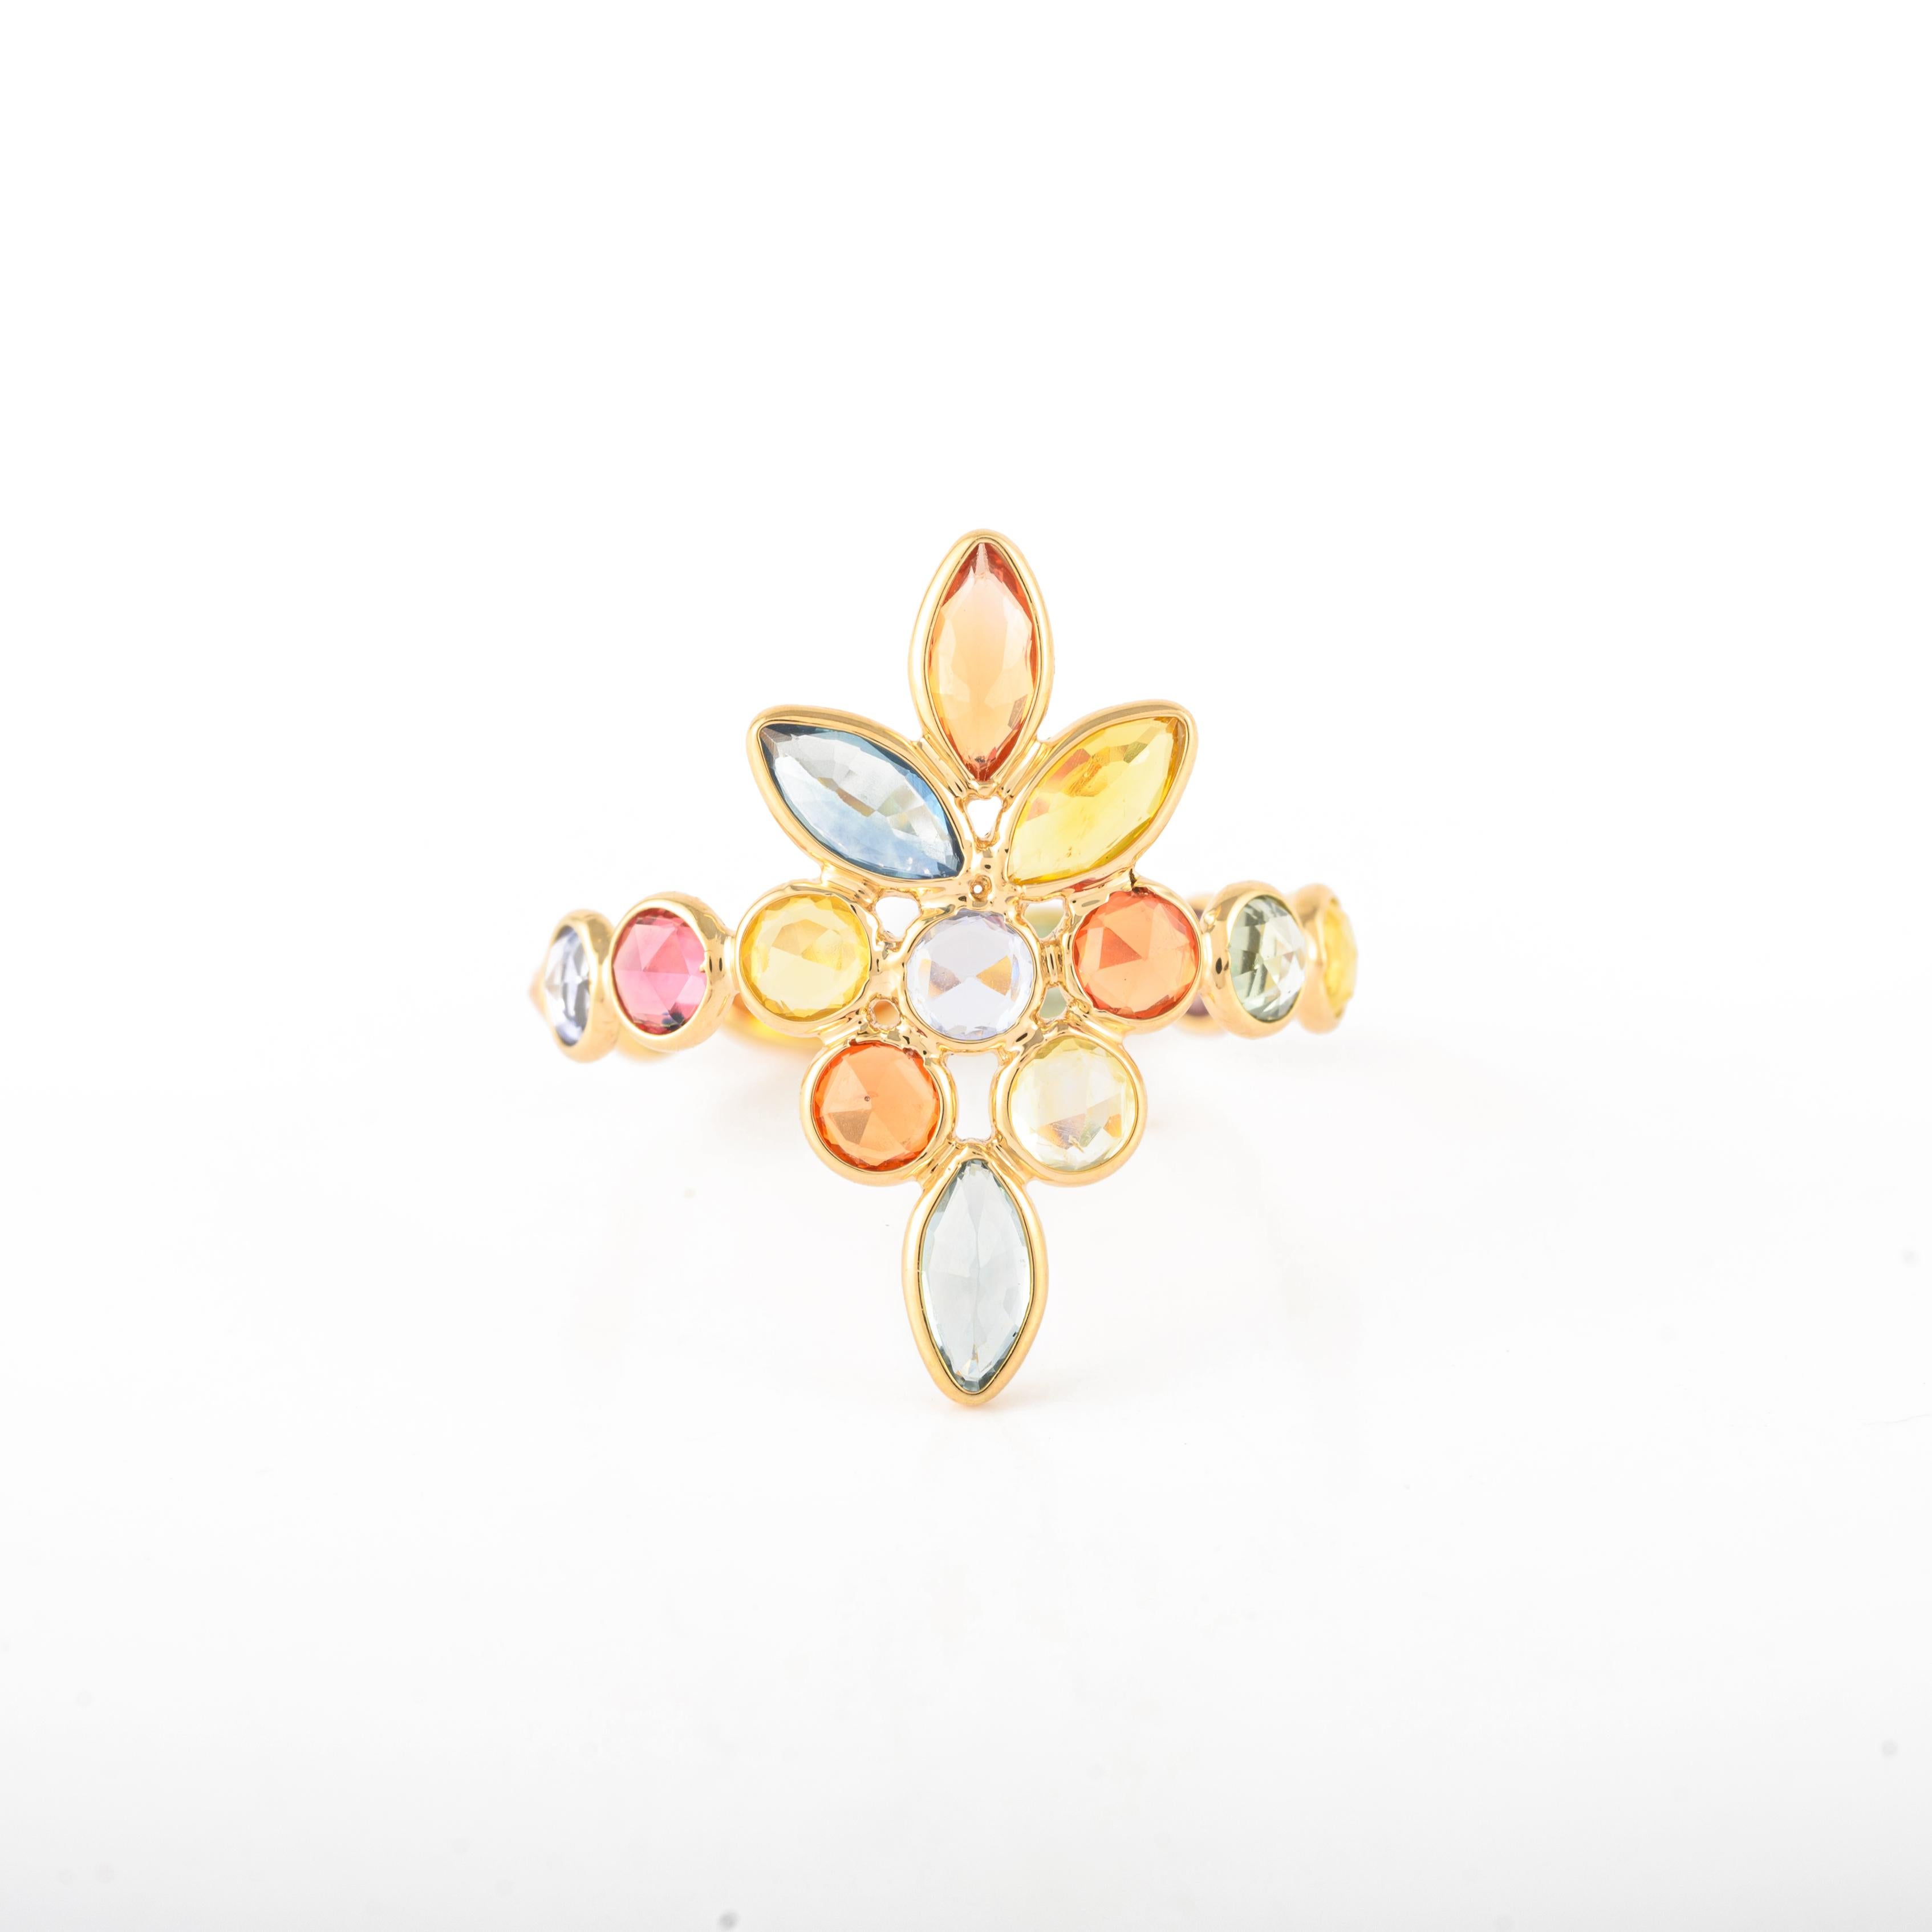 For Sale:  4.81ct Multi Sapphire Elongated Floral Ring in 14k Solid Yellow Gold 3